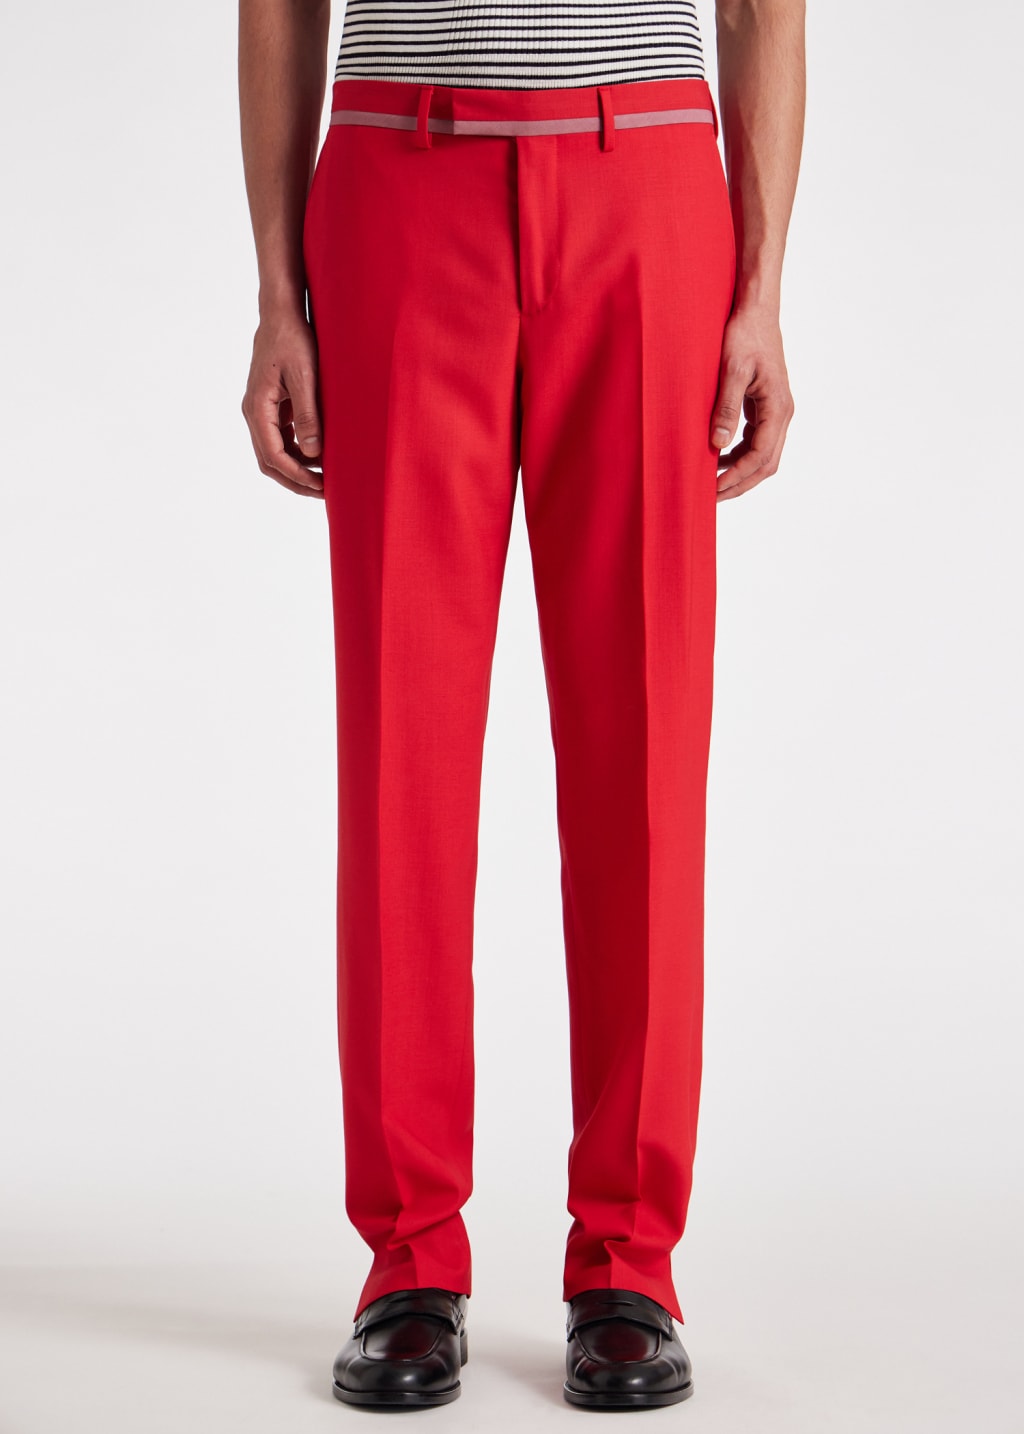 Model View - Red Fresco Wool Trousers Paul Smith